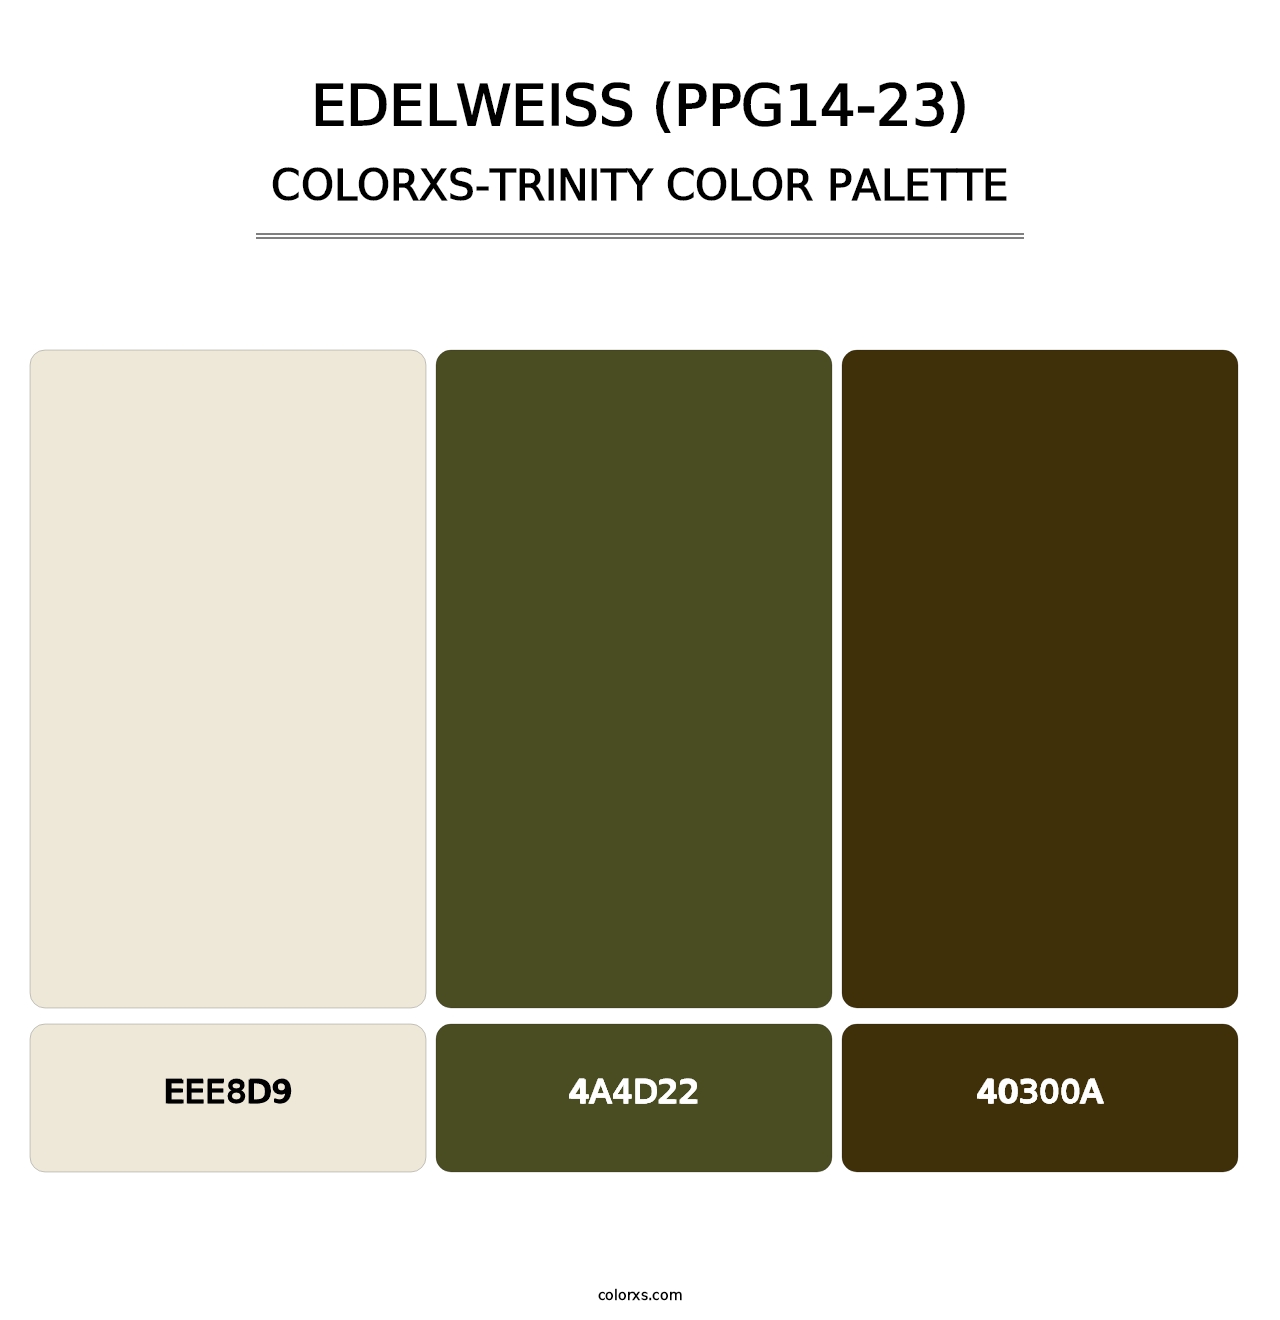 Edelweiss (PPG14-23) - Colorxs Trinity Palette